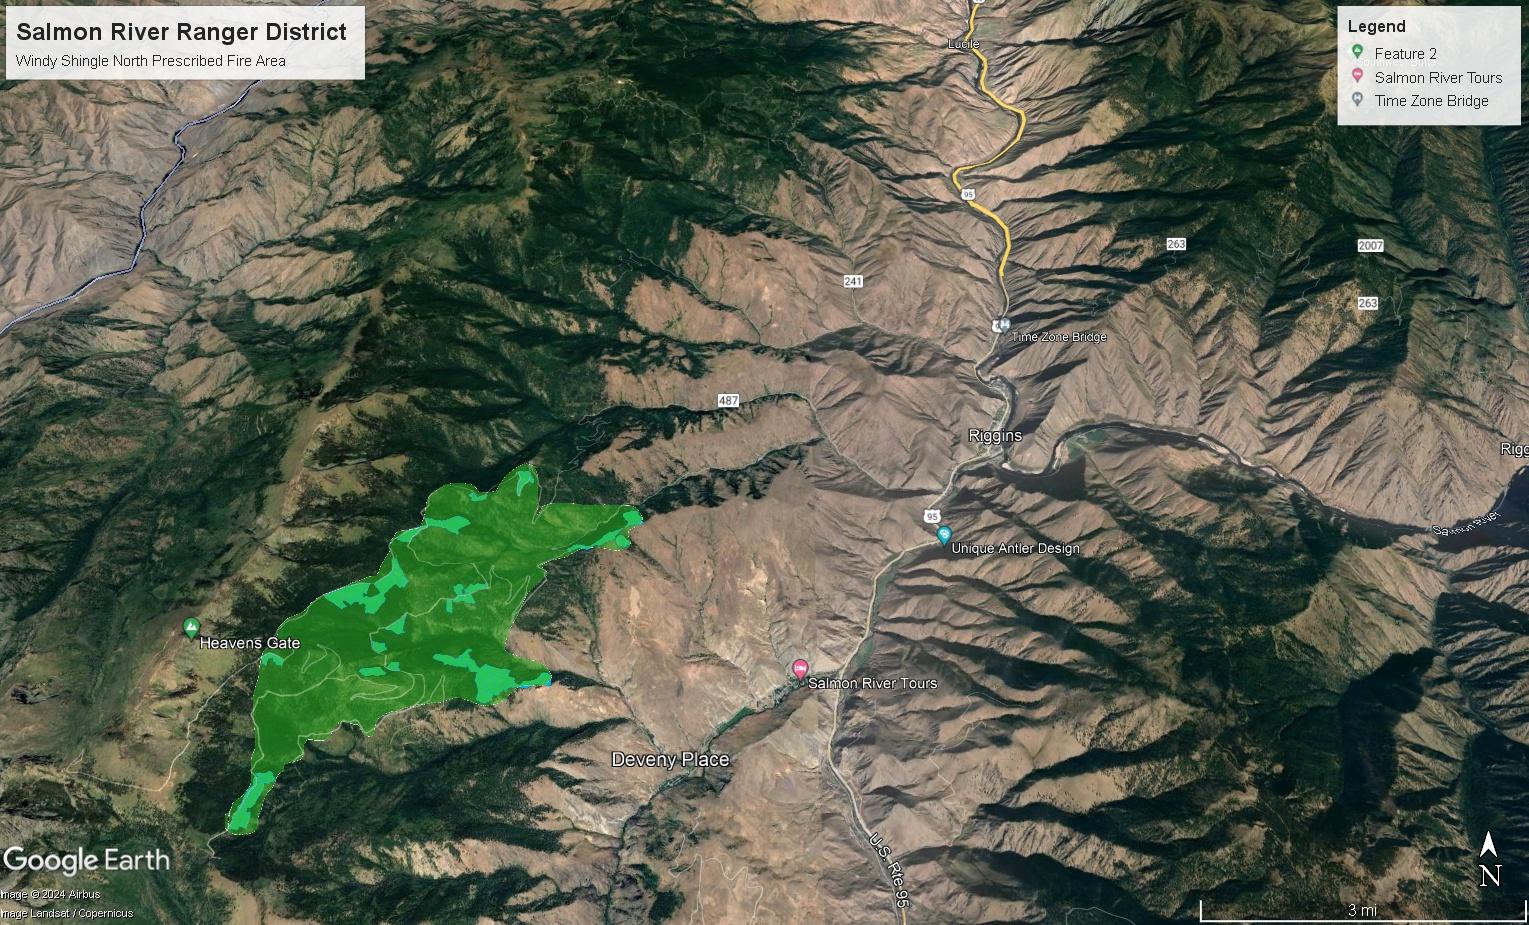 Satellite image depicting the Windy Shingle prescribed burn area near Heavens Gate and Deveny Place.